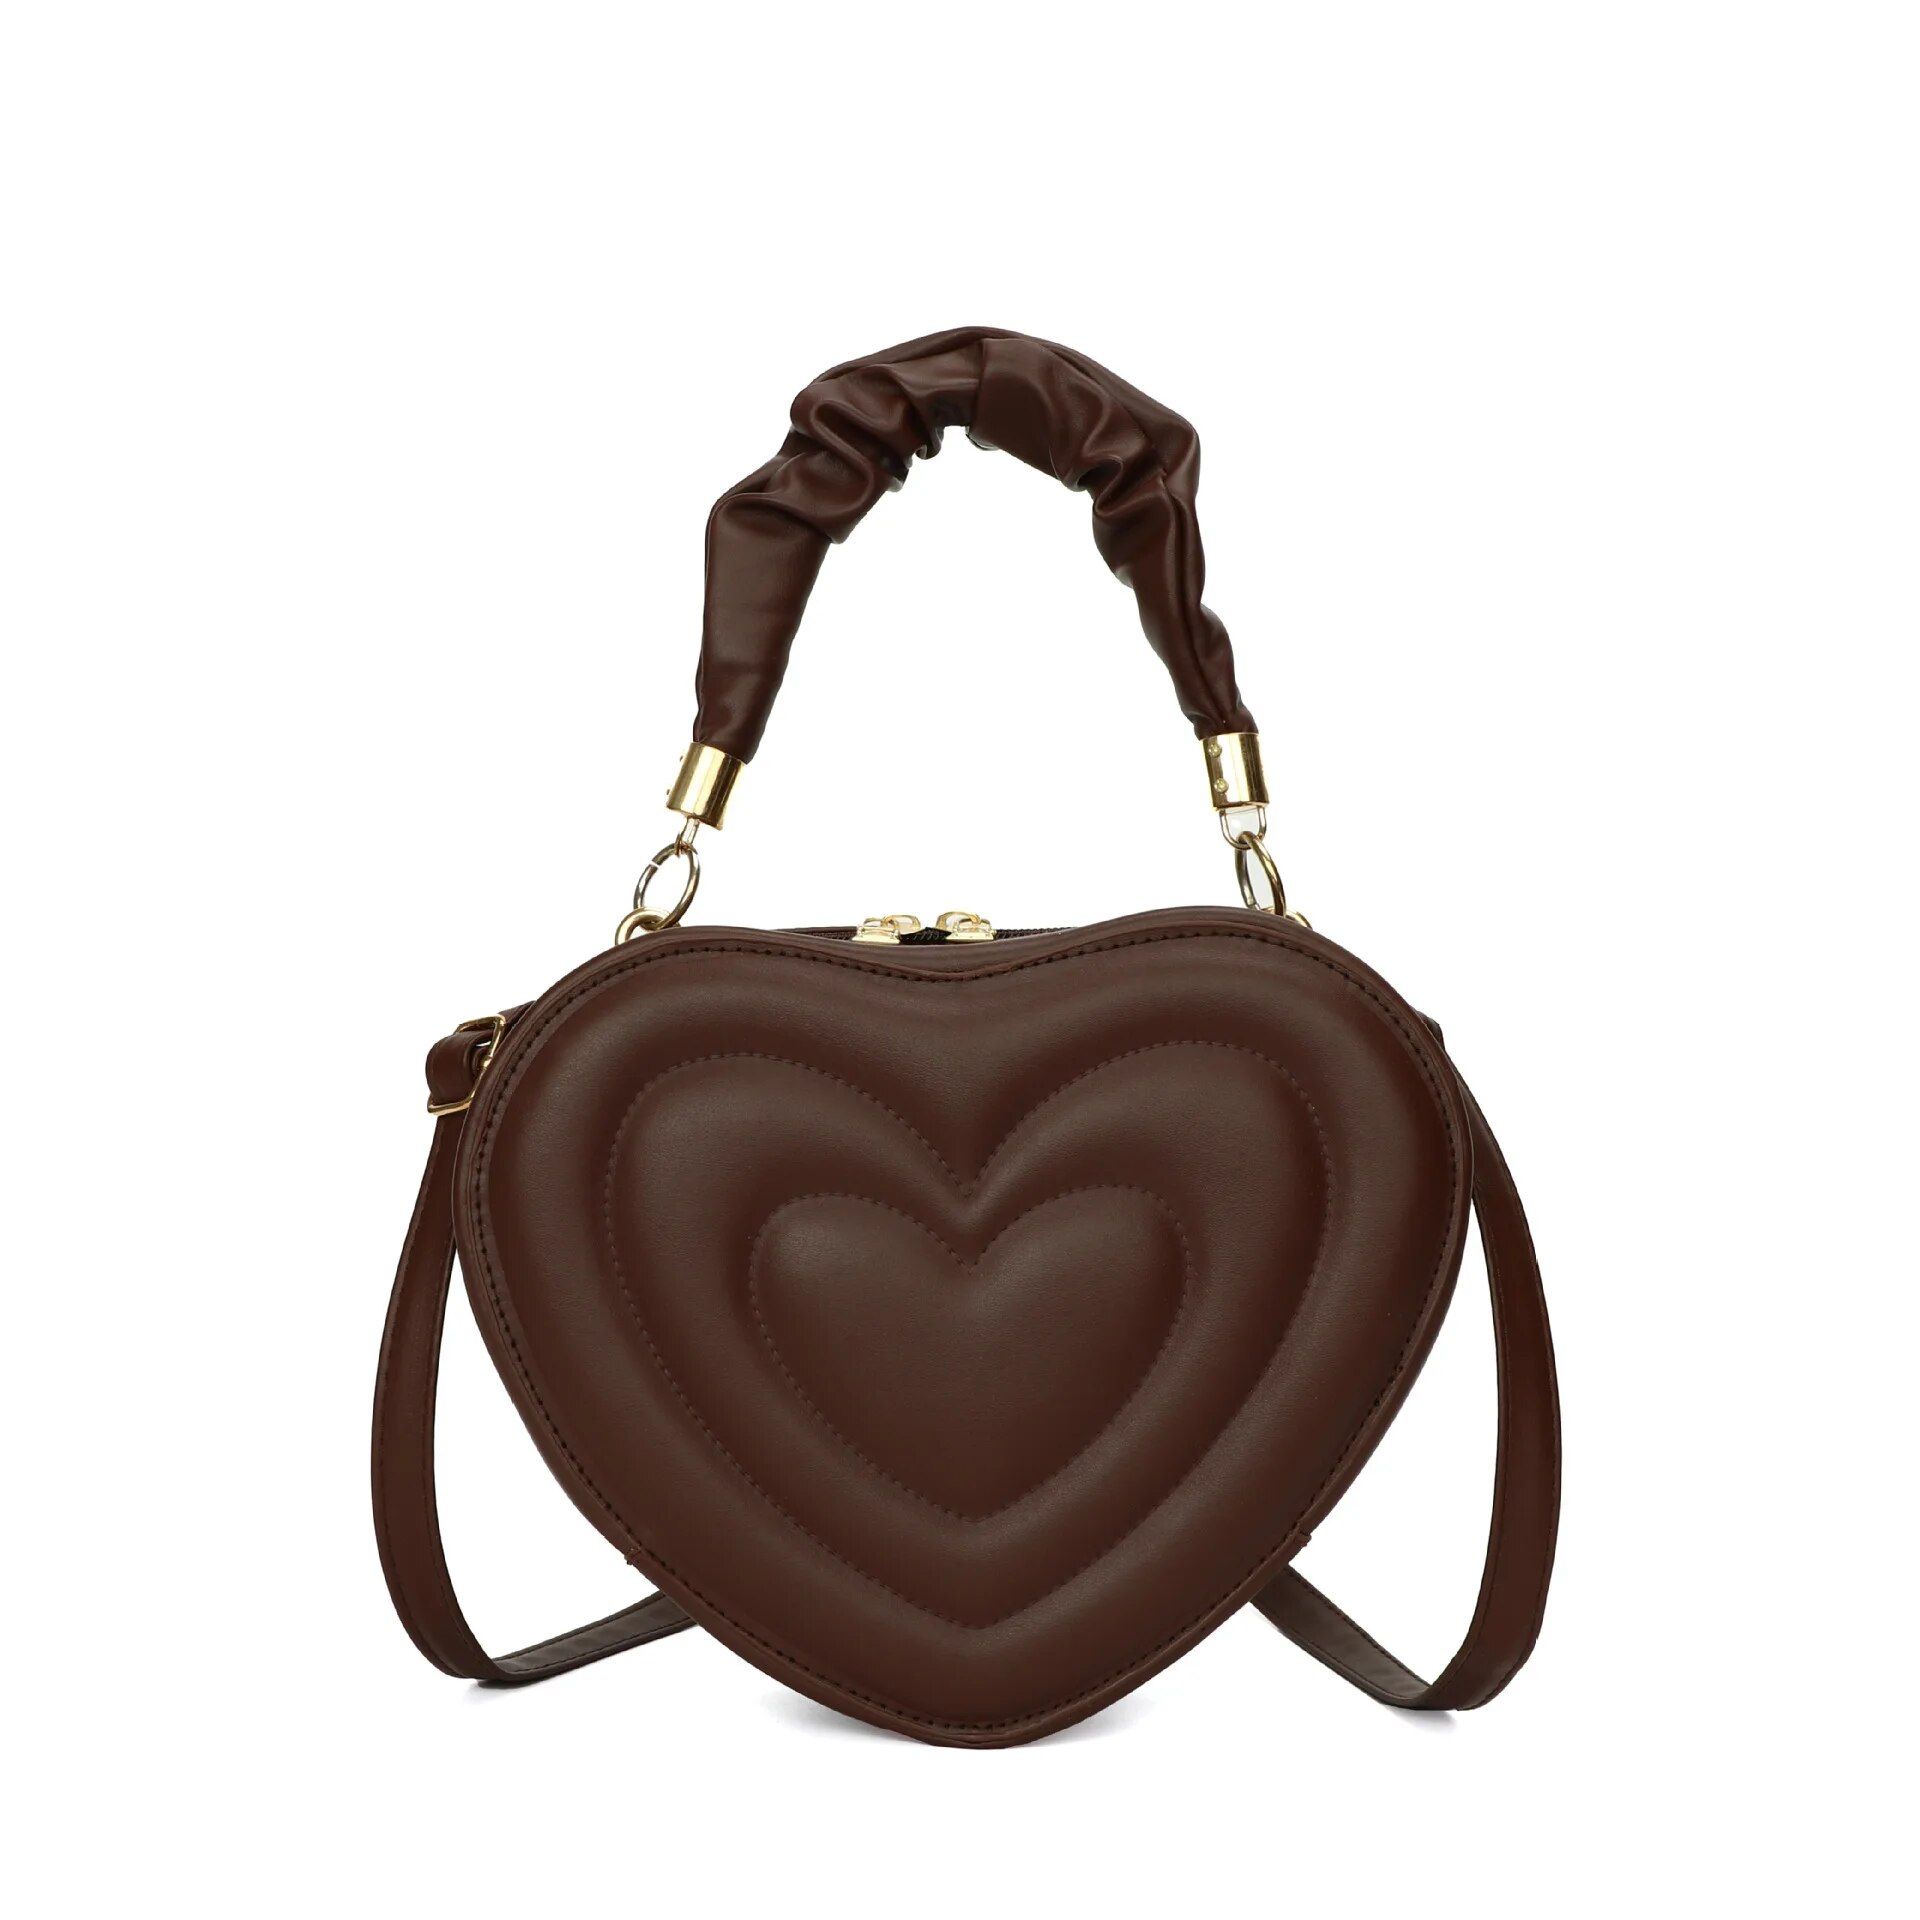 Chic Summer 2023 Heart-Shaped PU Leather Shoulder Bag for Women